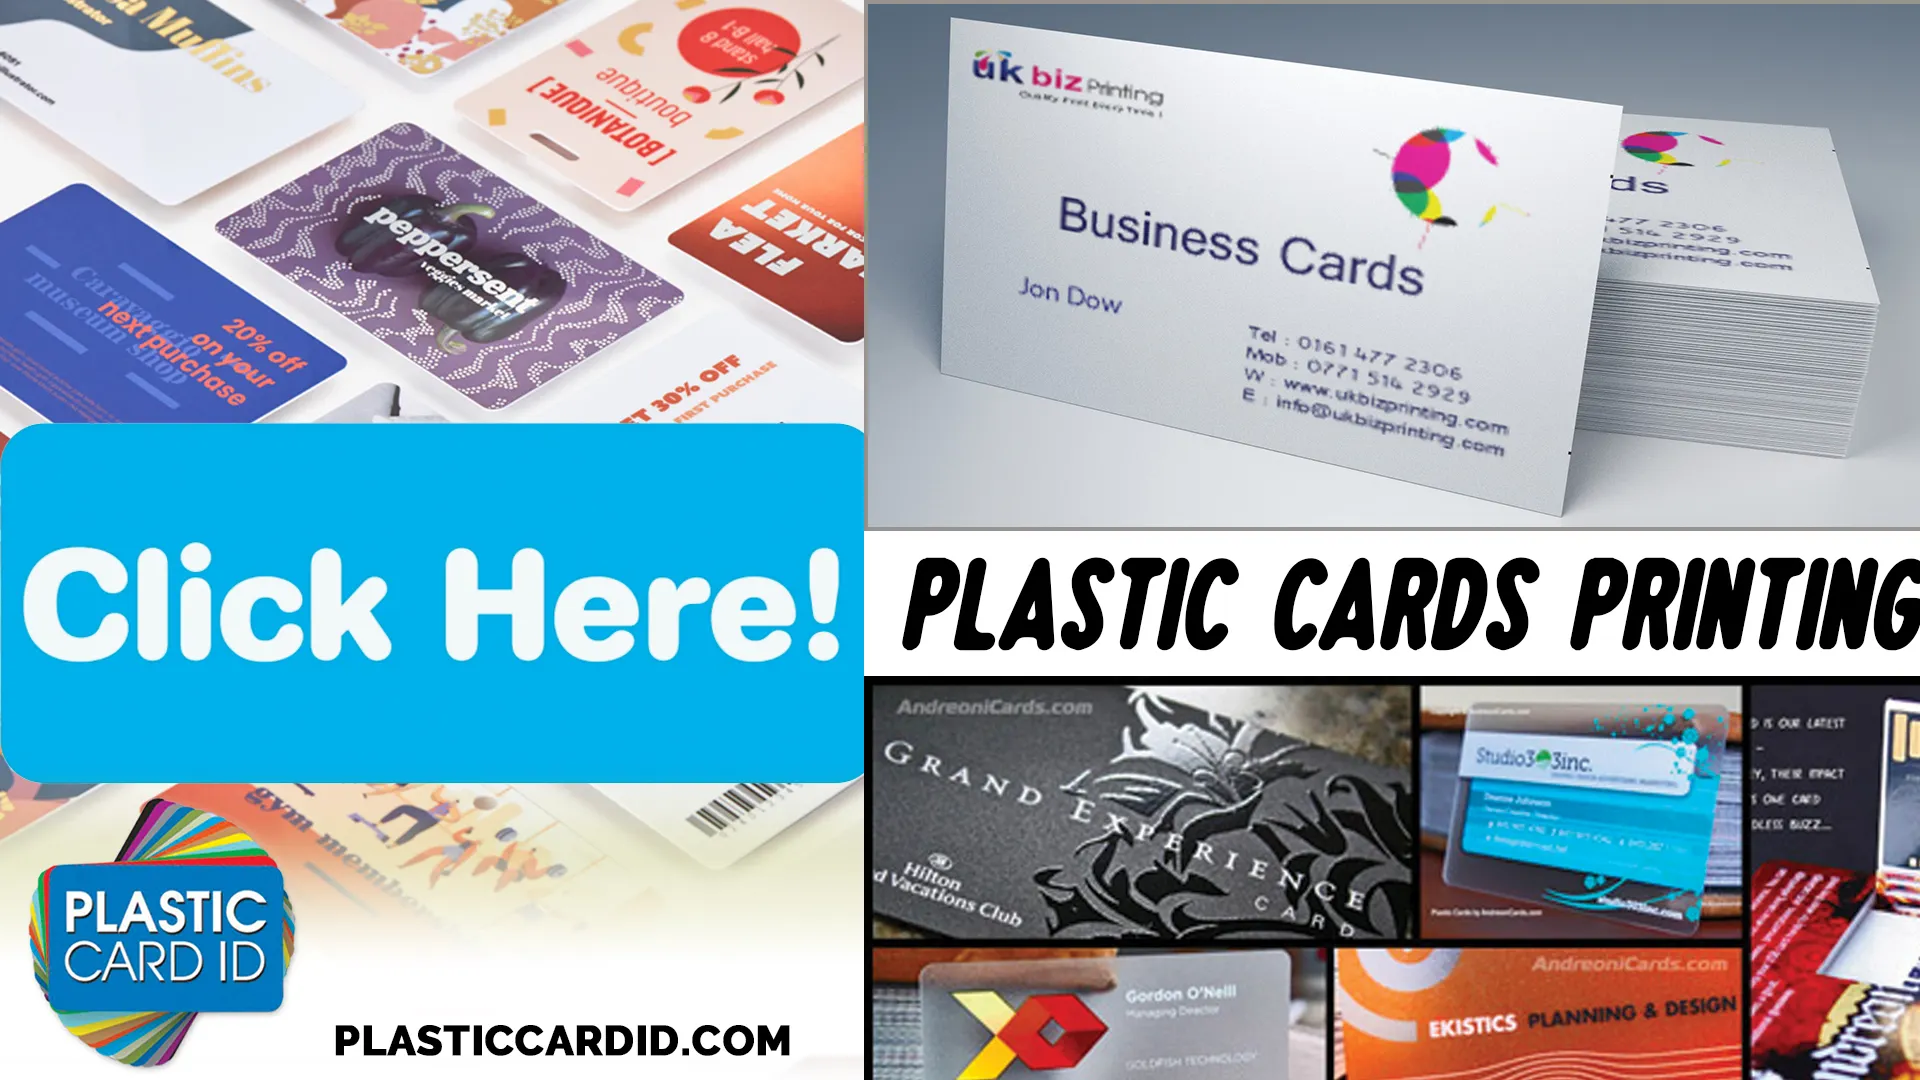 Strategic Planning for Your Plastic Card Costs